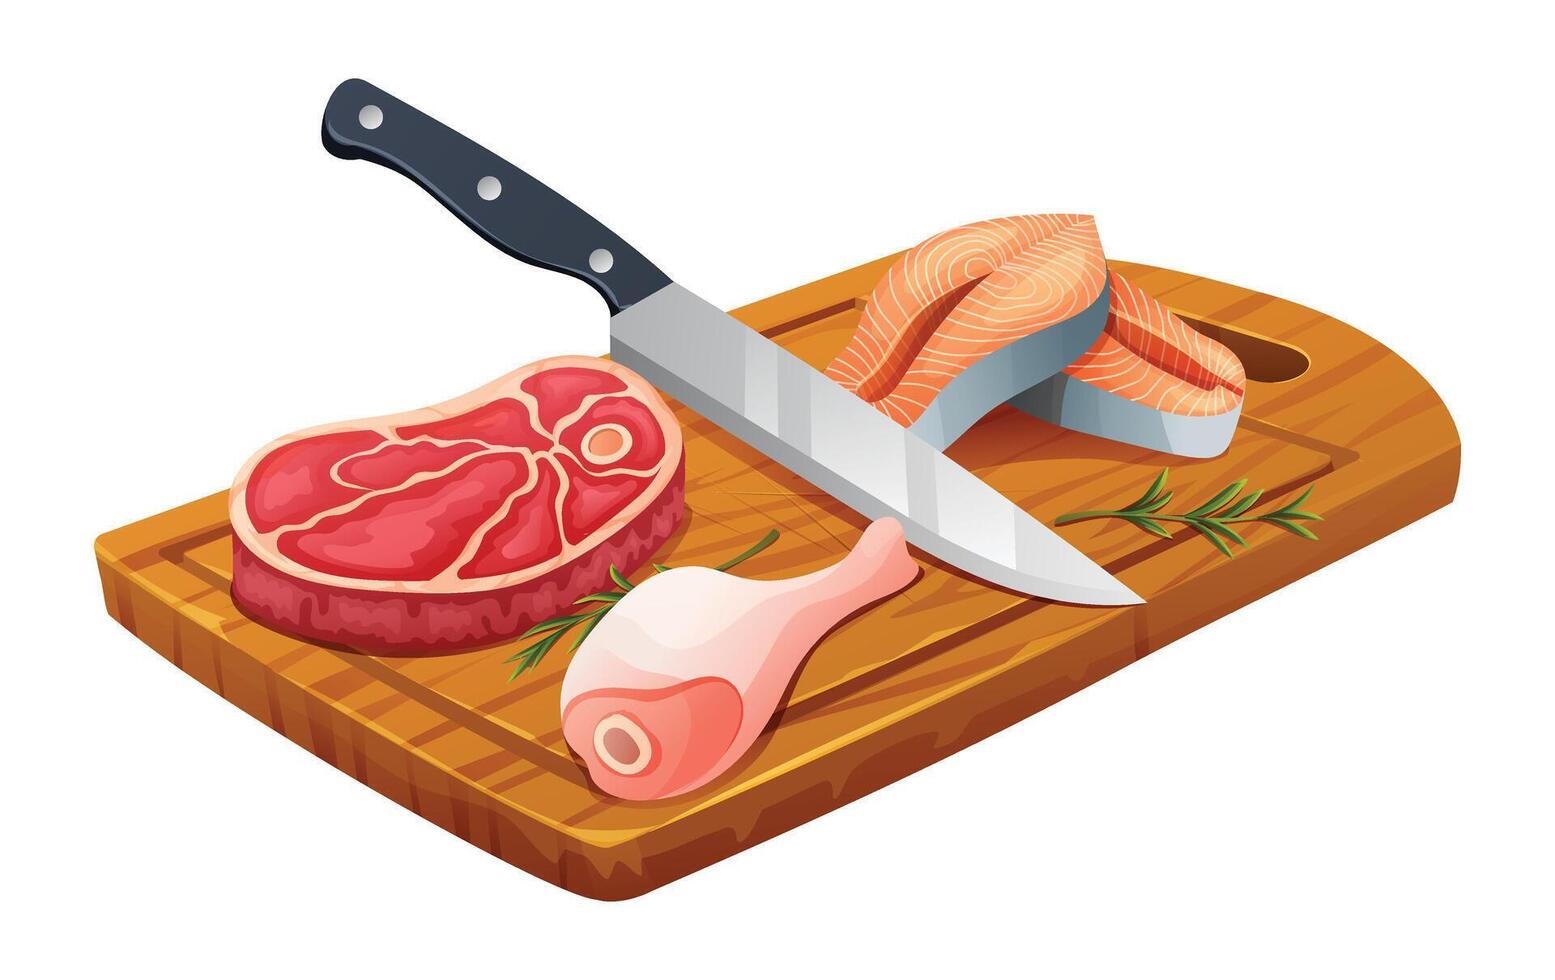 Fresh raw beef steak, chicken leg, and salmon steaks with knife on cutting board. Vector illustration isolated on white background